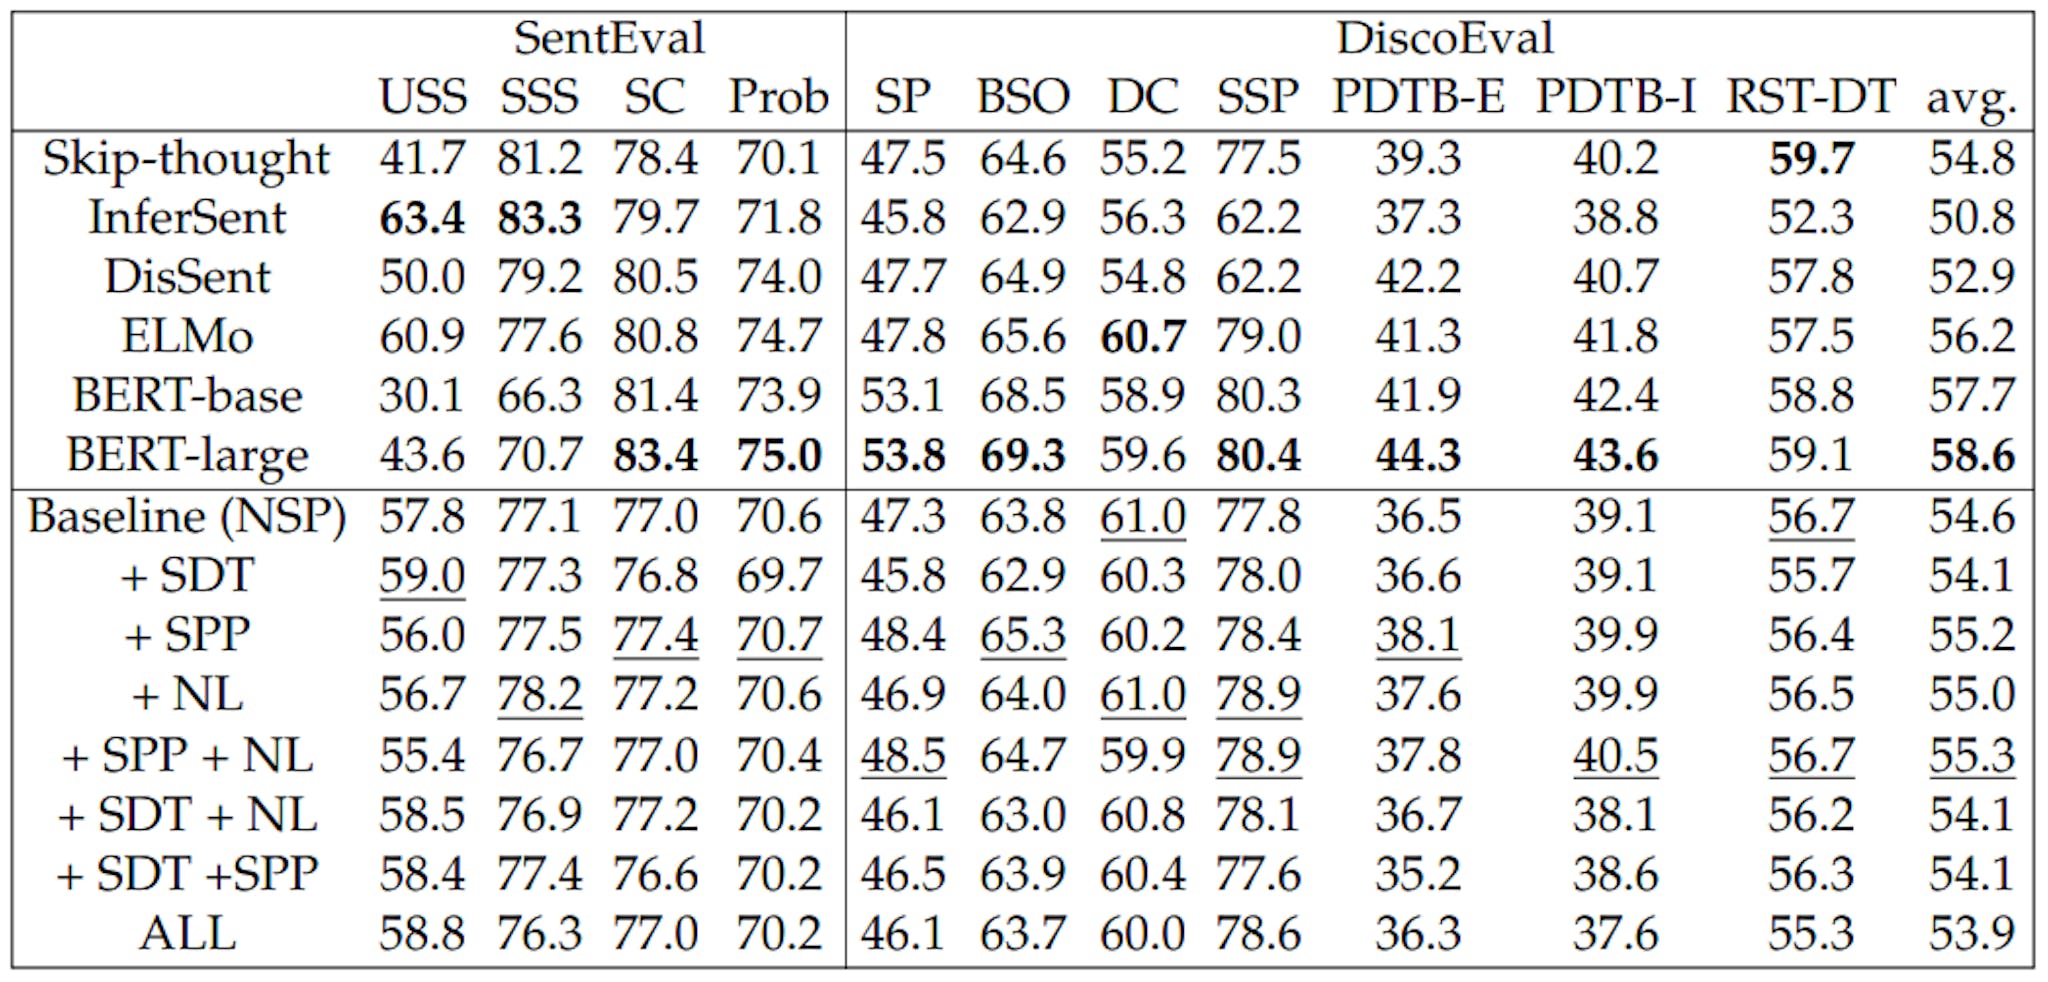 Table 4.4: Results for SentEval and DiscoEval. The highest number in each column is boldfaced. The highest number for our models in each column is underlined. “All” uses all four losses. “avg.” is the averaged accuracy for all tasks in DiscoEval.